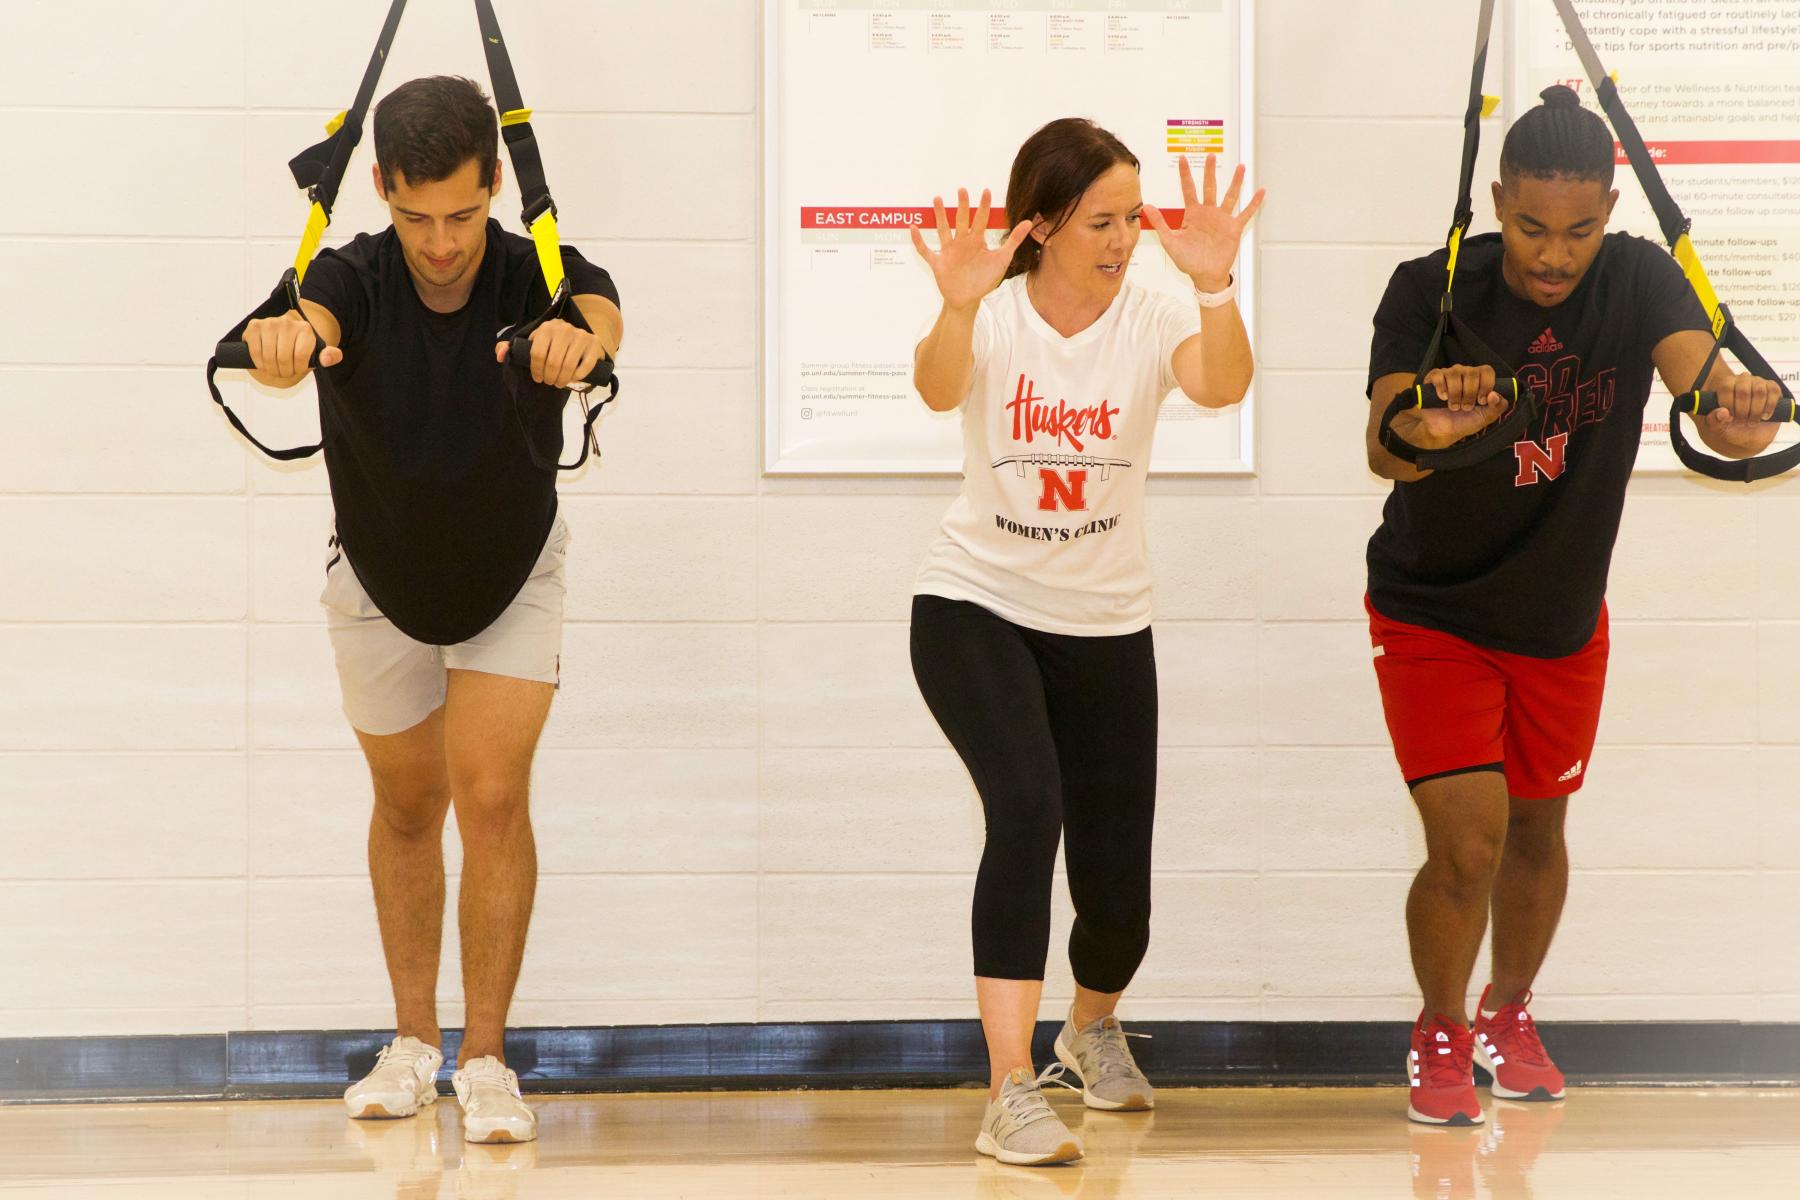 Participants work with a personal trainer on the TRX® apparatus